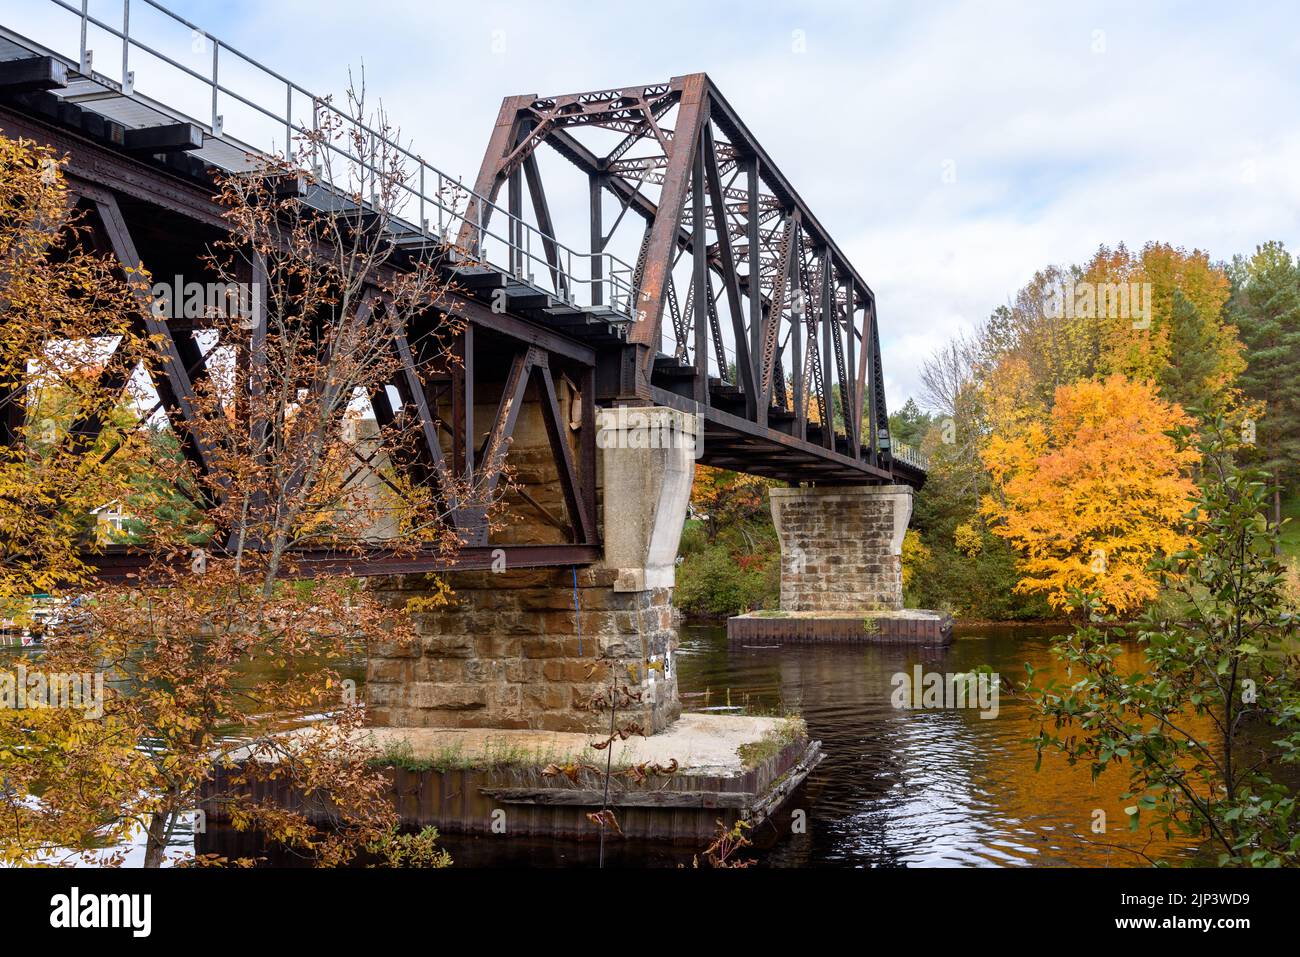 Old metal railroad bridge spanning a river on a cloudy autumn day Stock Photo